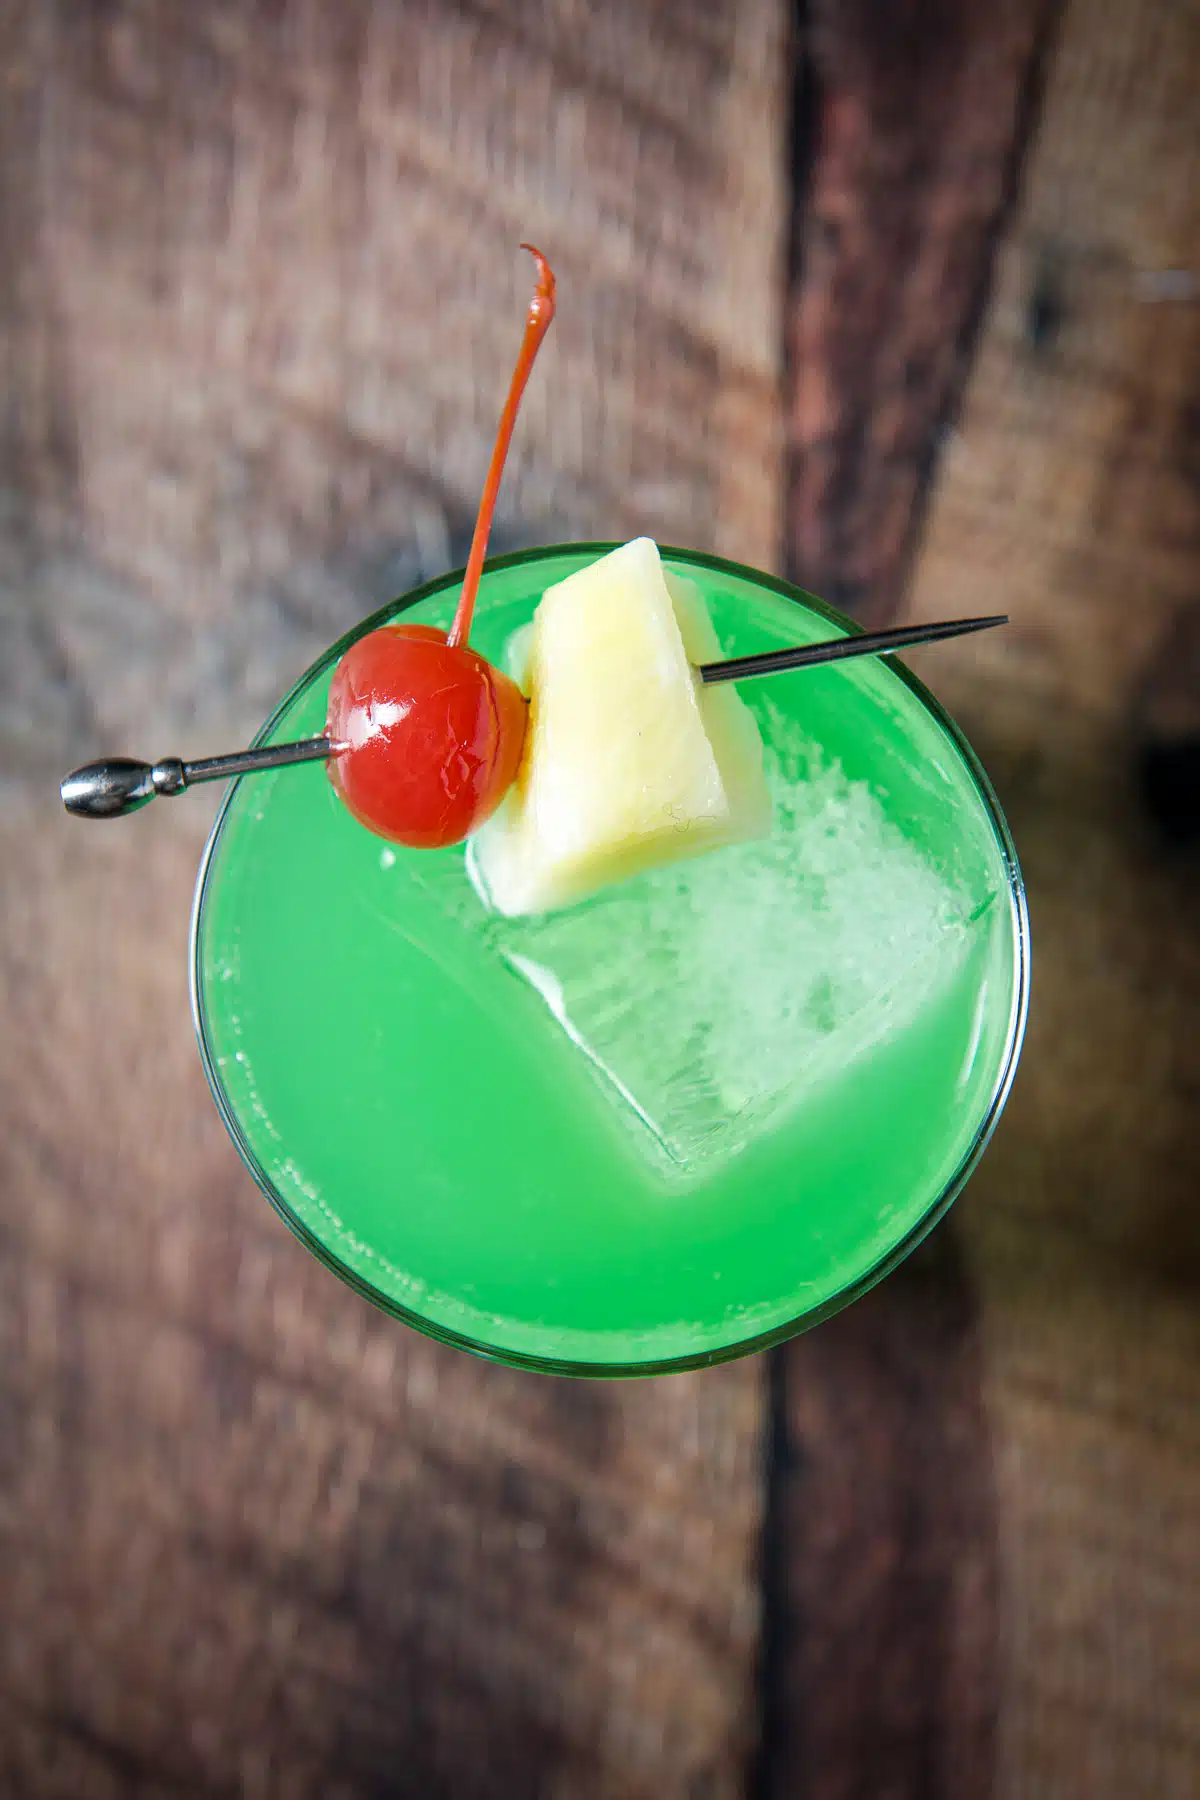 Overhead view of the green cocktail and its garnish of pineapple and cherry